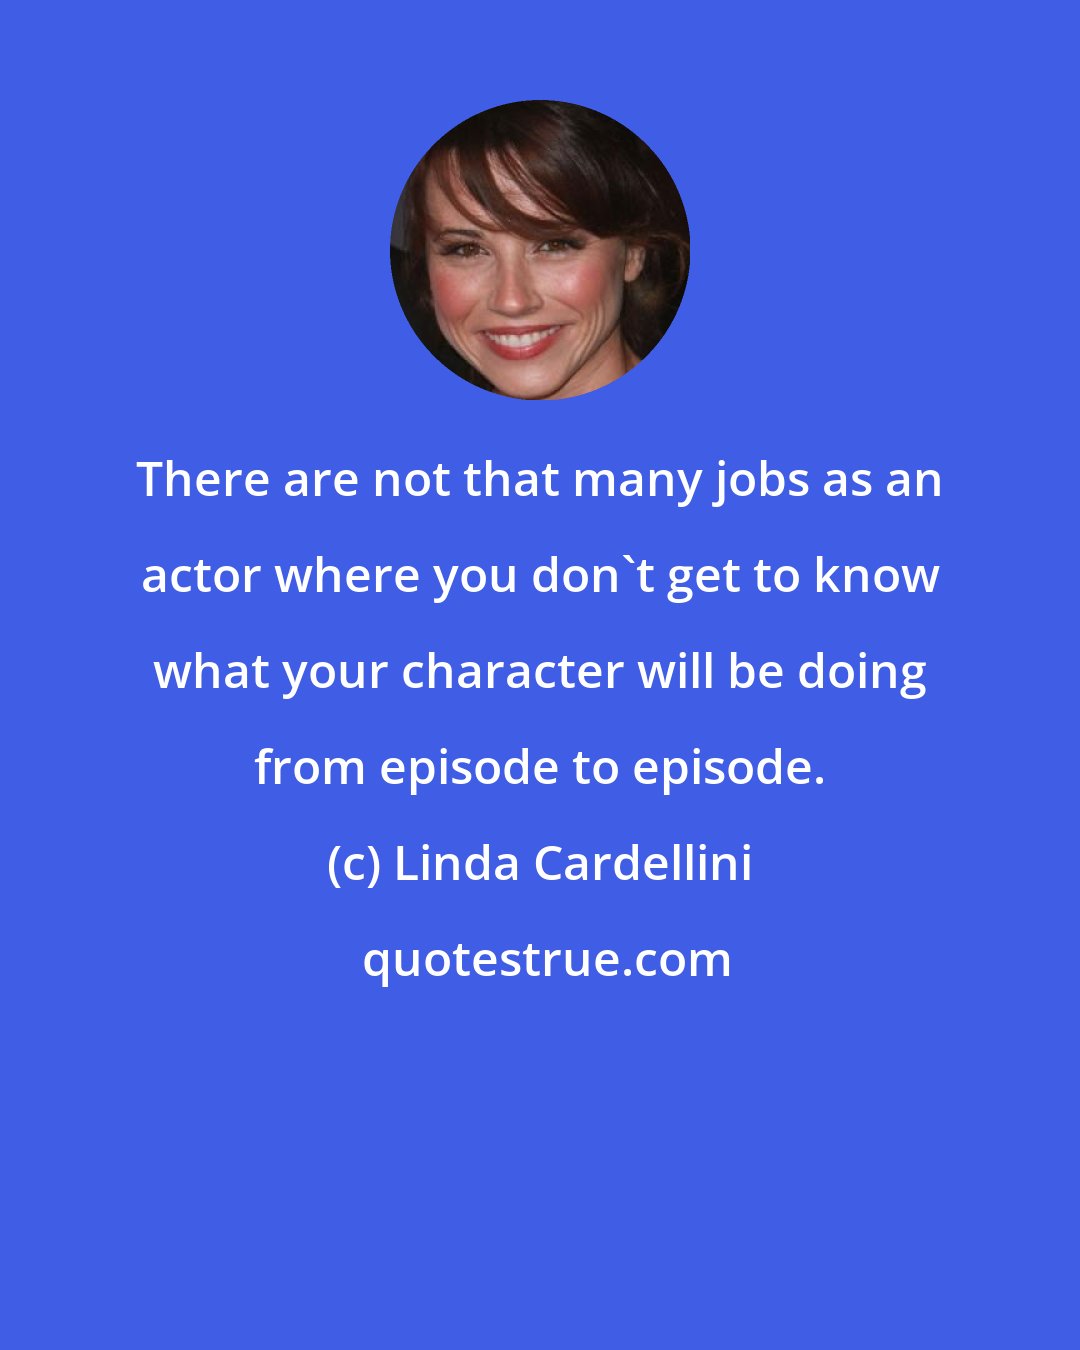 Linda Cardellini: There are not that many jobs as an actor where you don't get to know what your character will be doing from episode to episode.